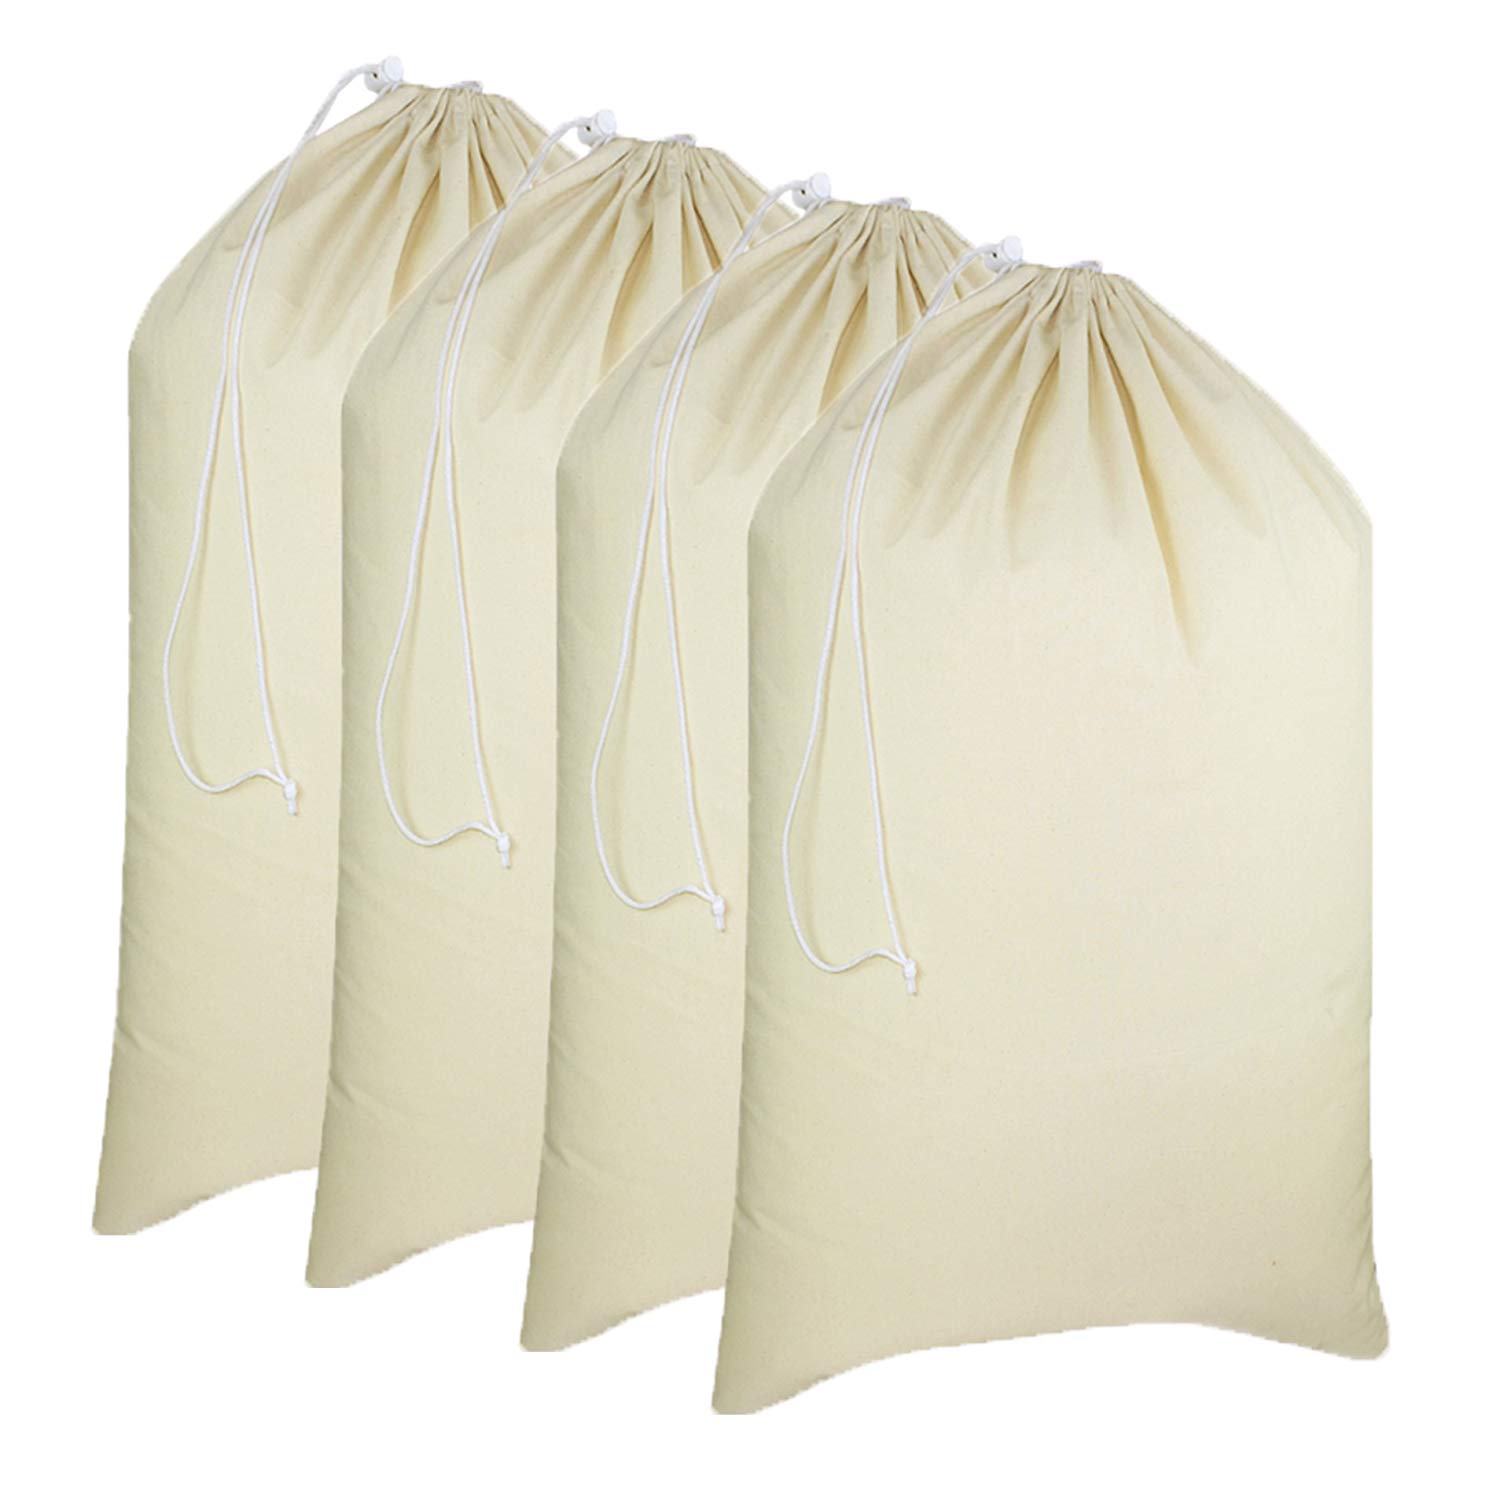 COTTON CRAFT Easy Close Laundry Bags, 4-Pack